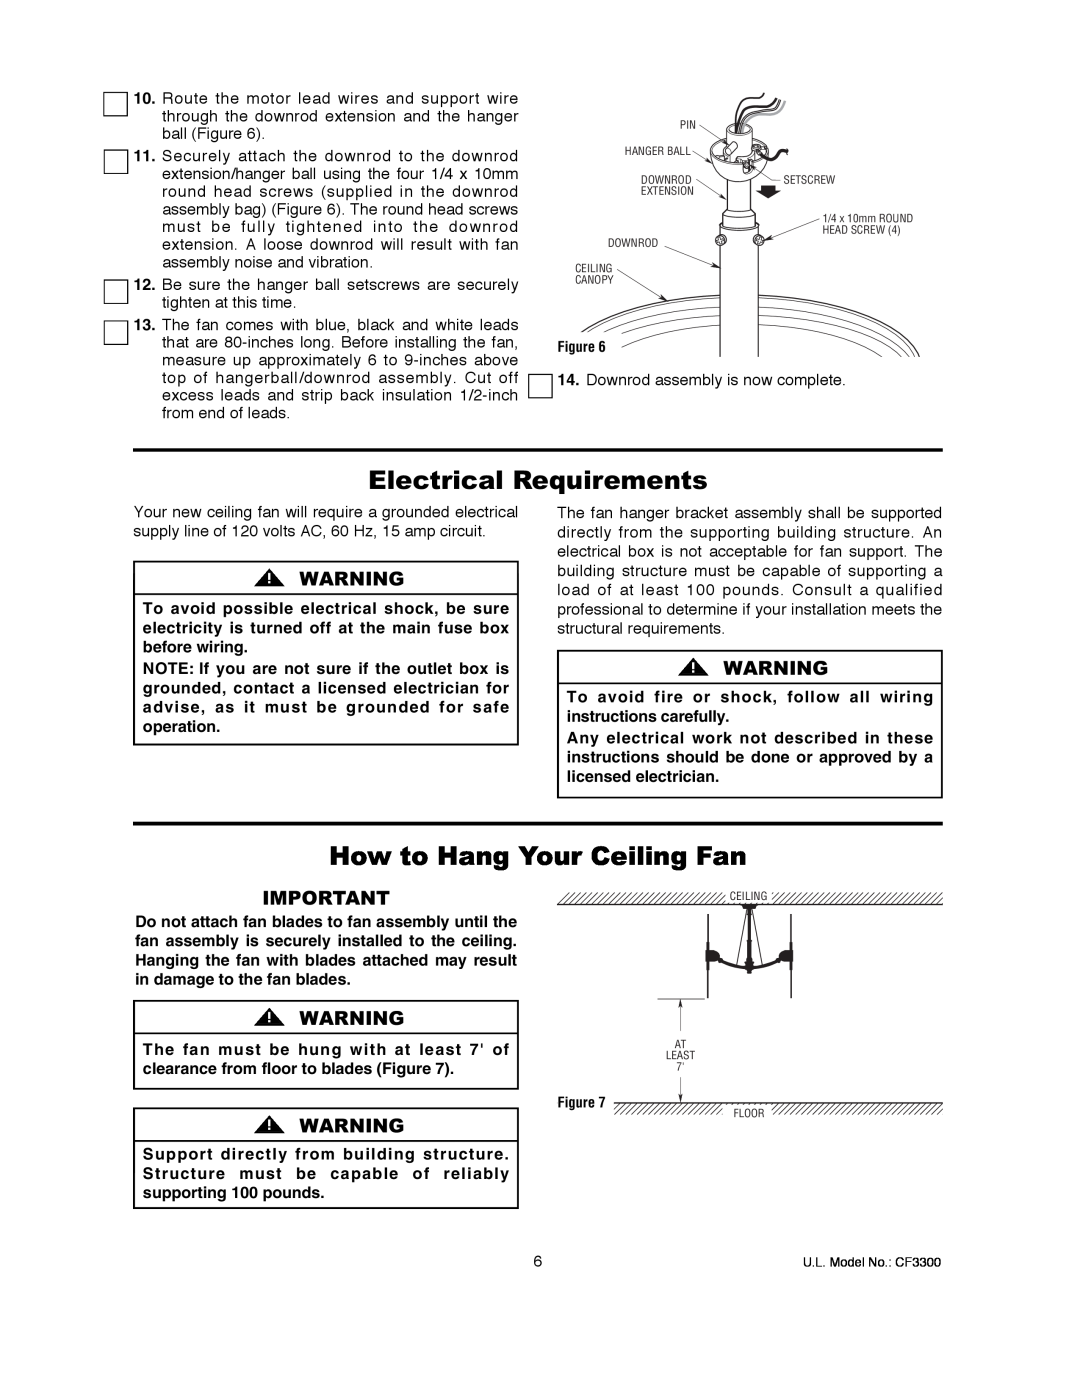 Emerson CF3300AP, CF3300ORH warranty Electrical Requirements, How to Hang Your Ceiling Fan 